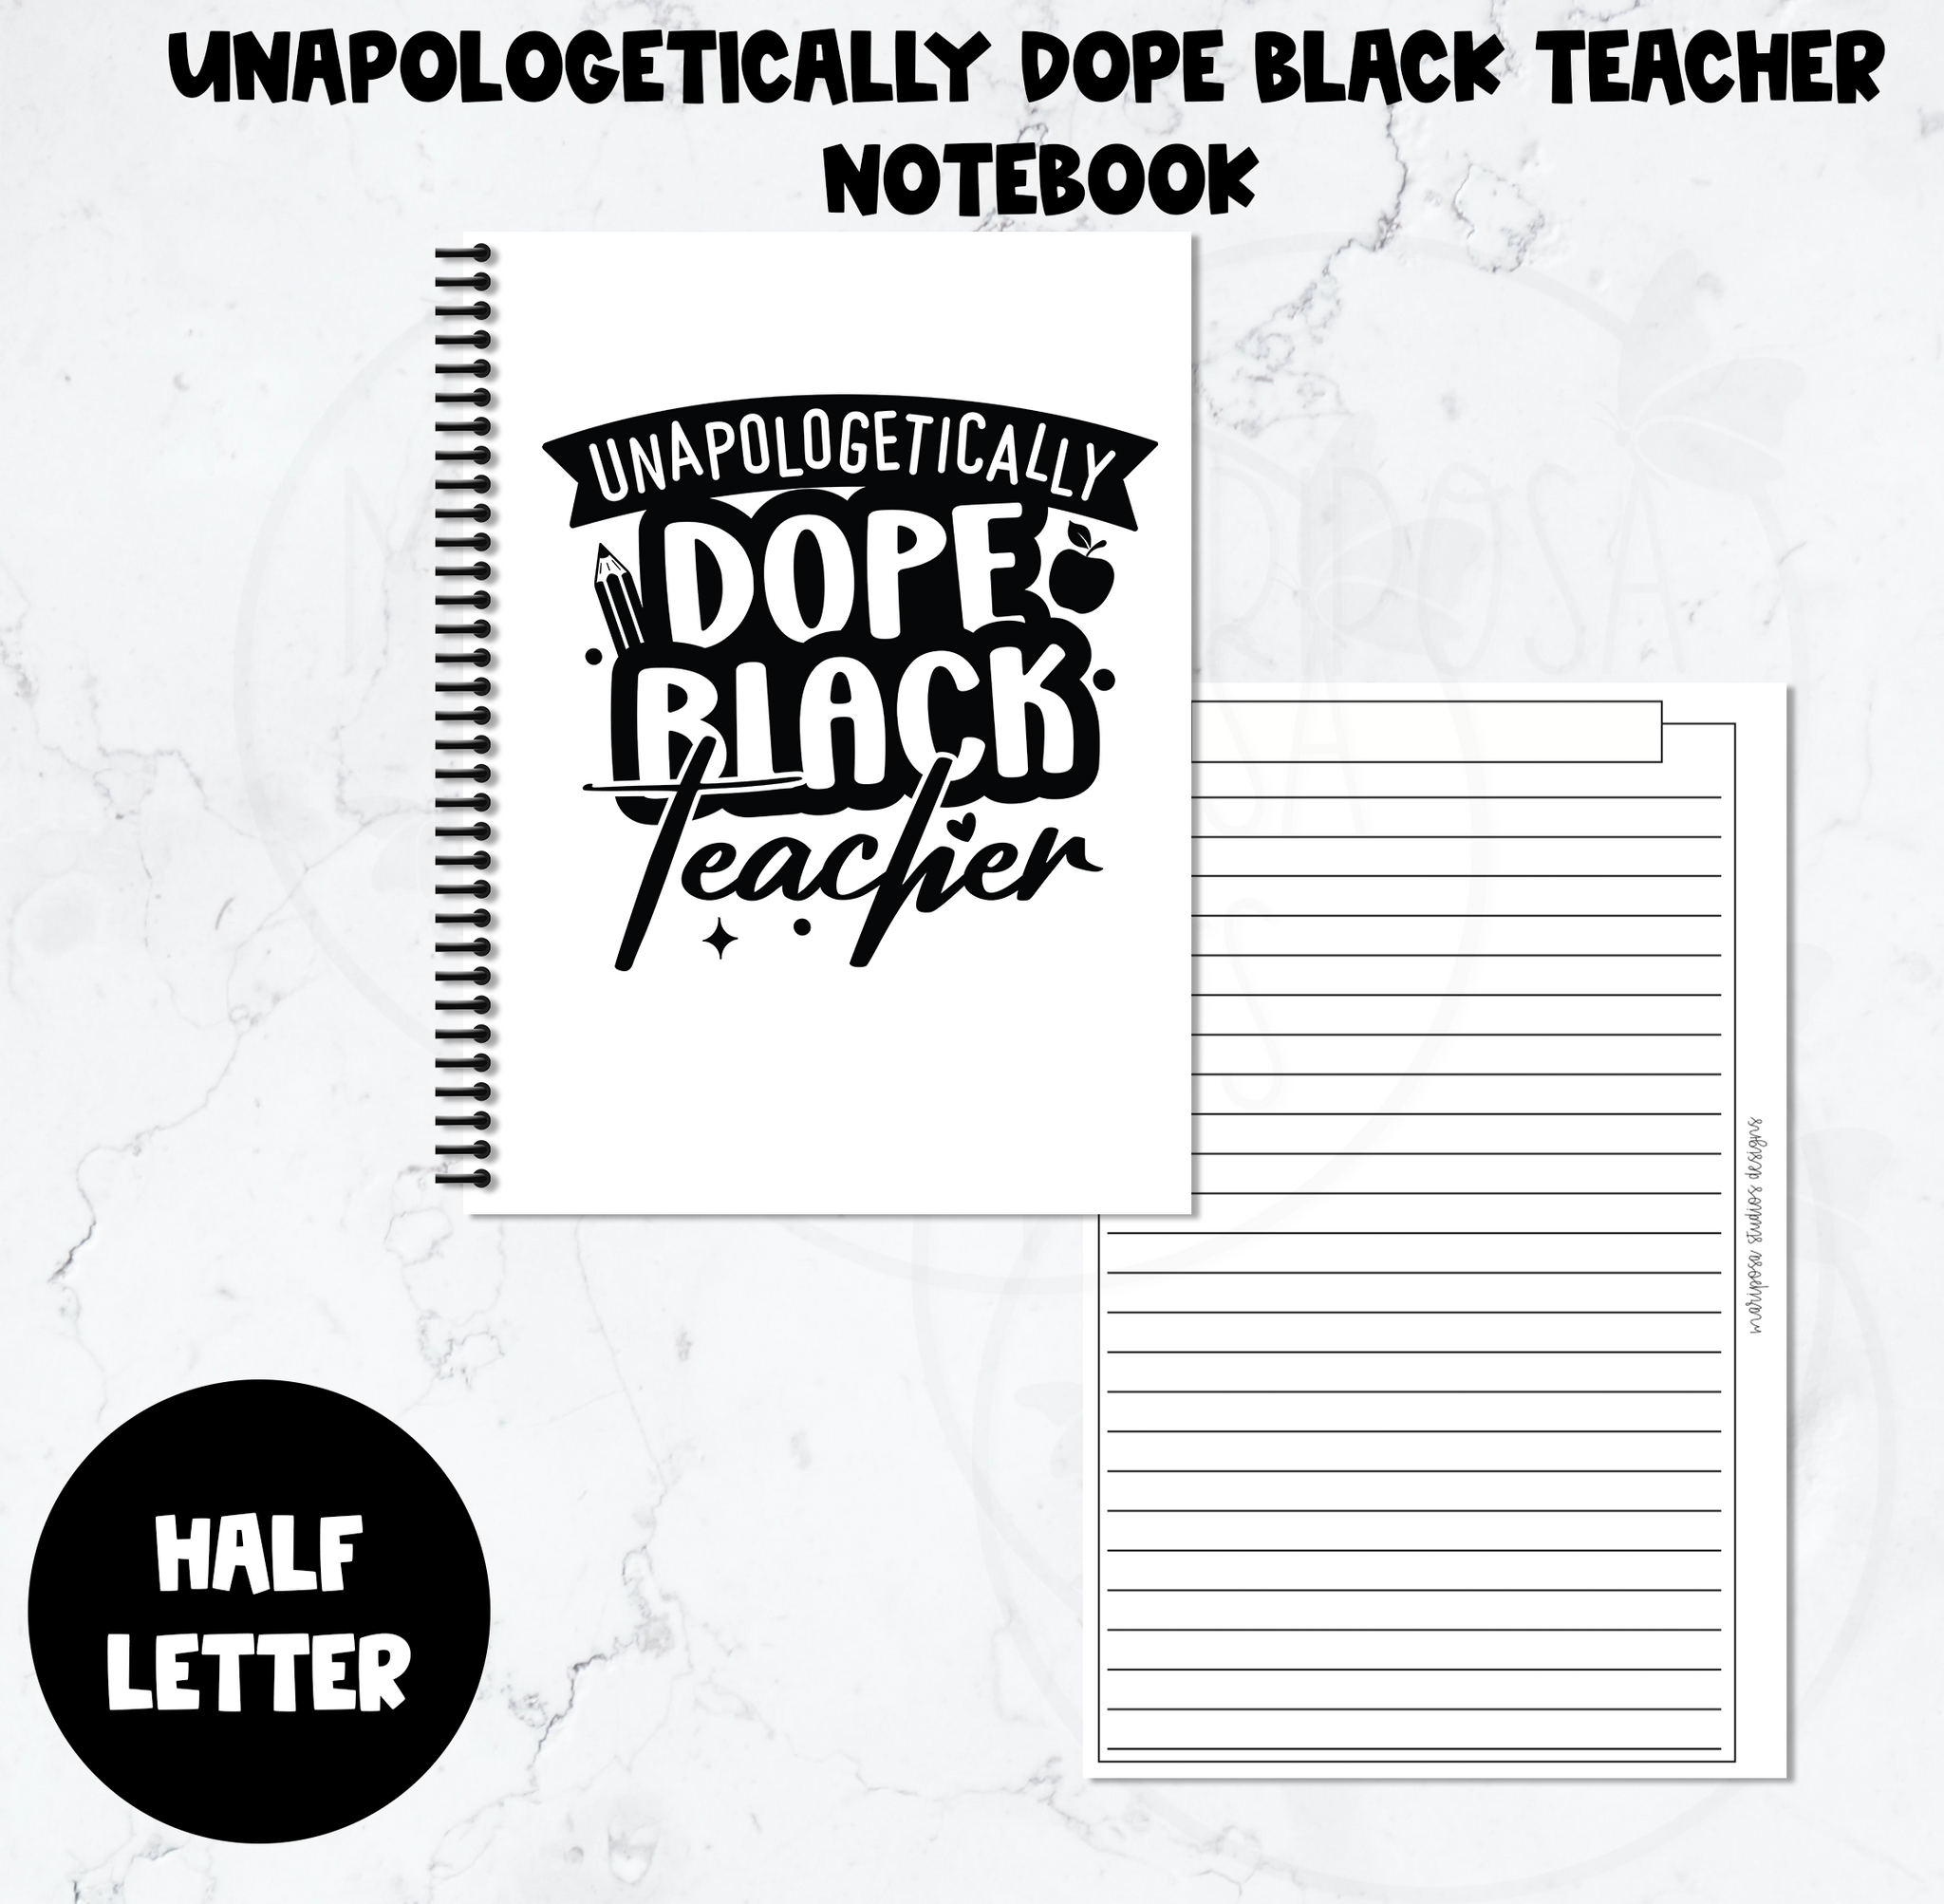 Unapologetically Dope Black Teacher Notebook